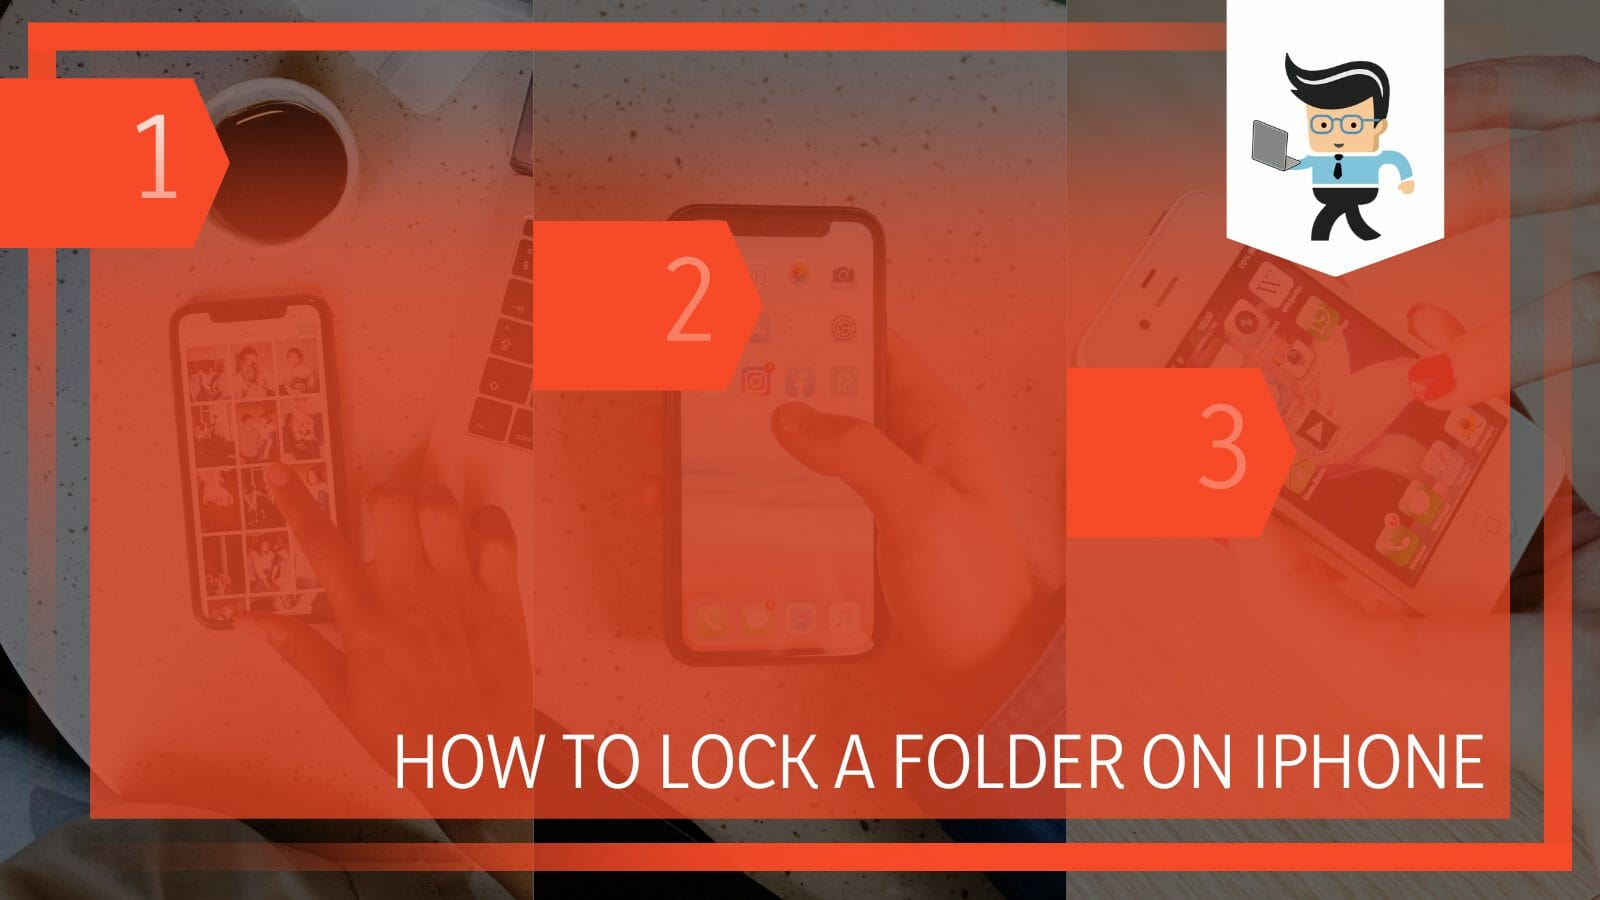 How to Lock a Folder on iPhone